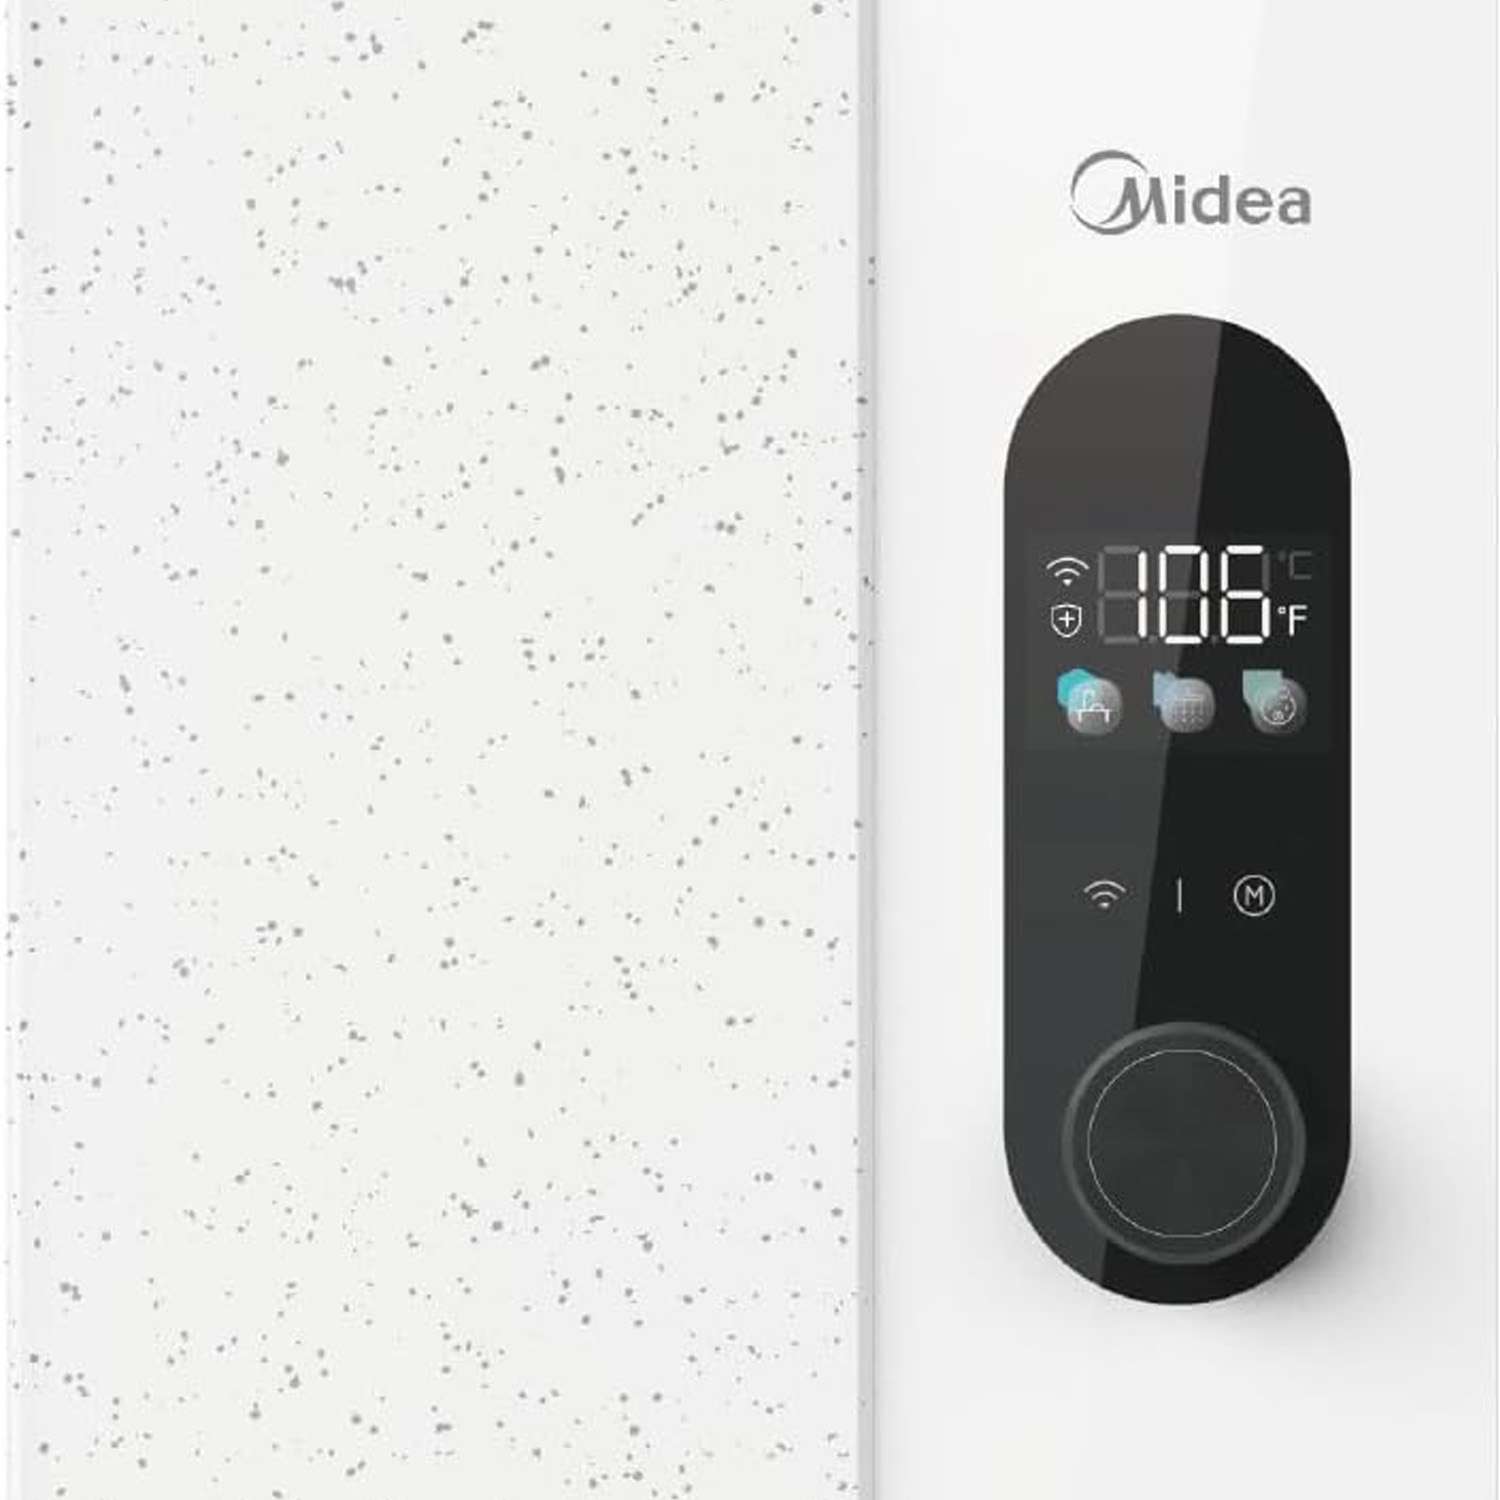 Midea 18KW Electric Tankless Water Heater, Touch Control, Wi-Fi Control, LED Display, Child Mode, 240 Volts with Automatic Power Modulation, On-demand Hot Water, White